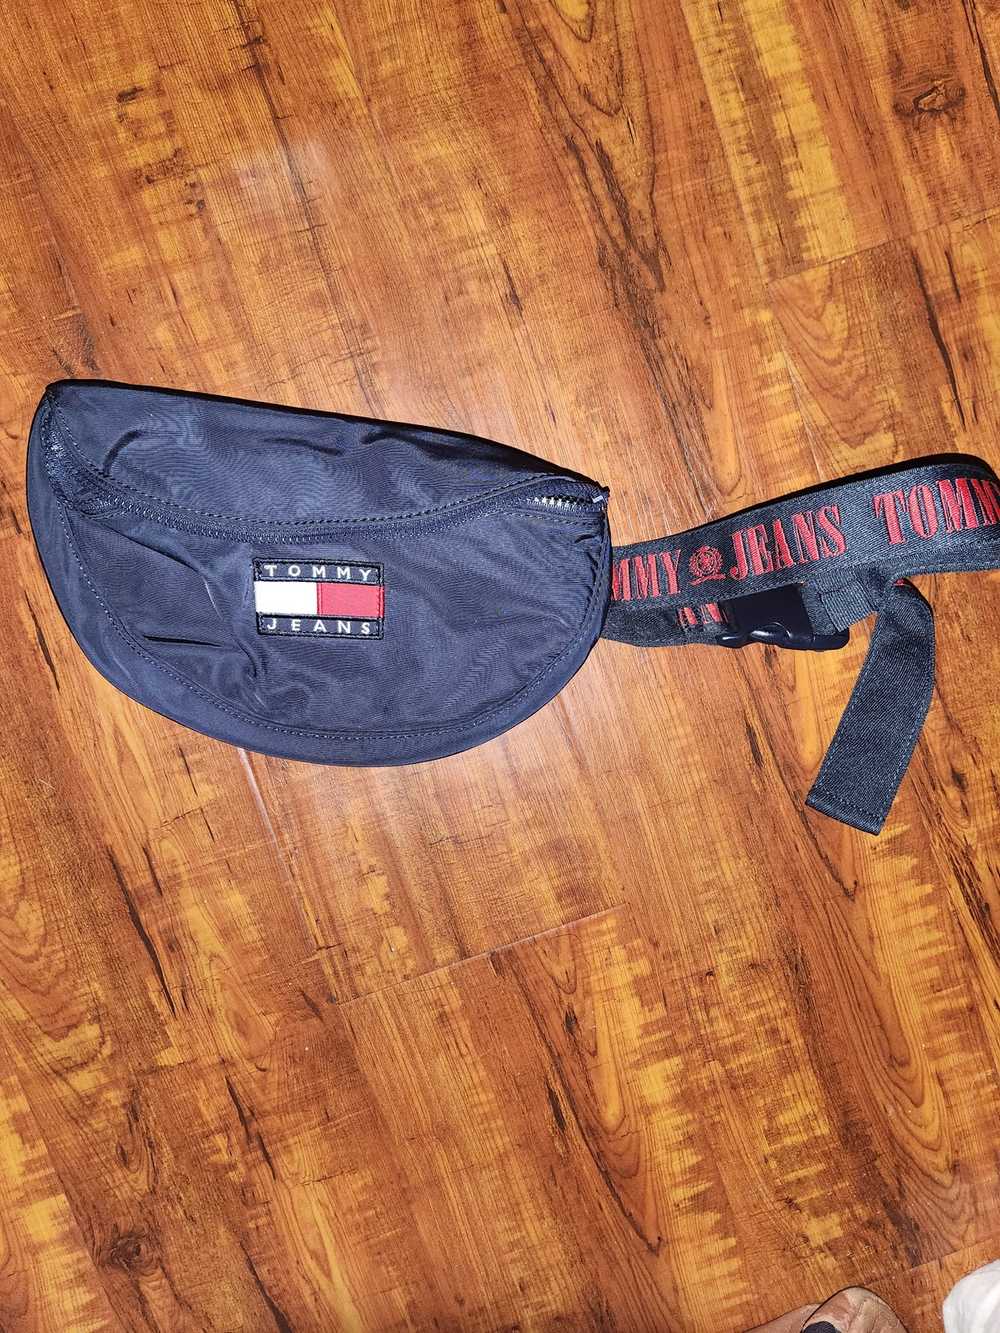 Tommy Jeans Tommy jeans waist bag - image 2